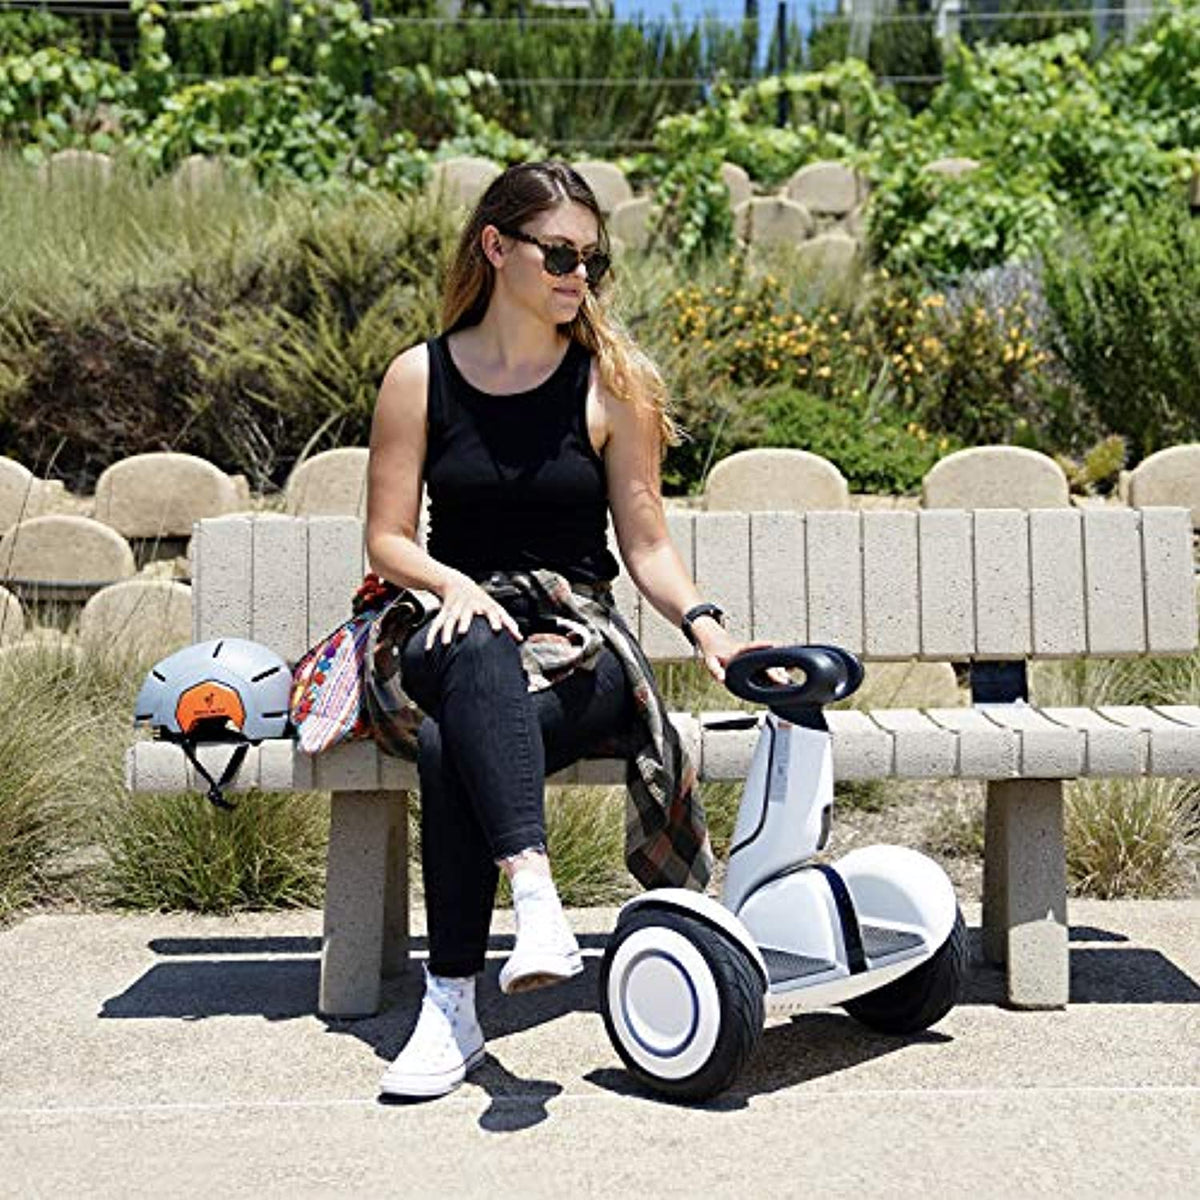 Segway Ninebot S-Plus Smart Self-Balancing Electric Scooter with Intelligent Lighting and Battery System, Remote Control and Auto-Following Mode, White - Like New